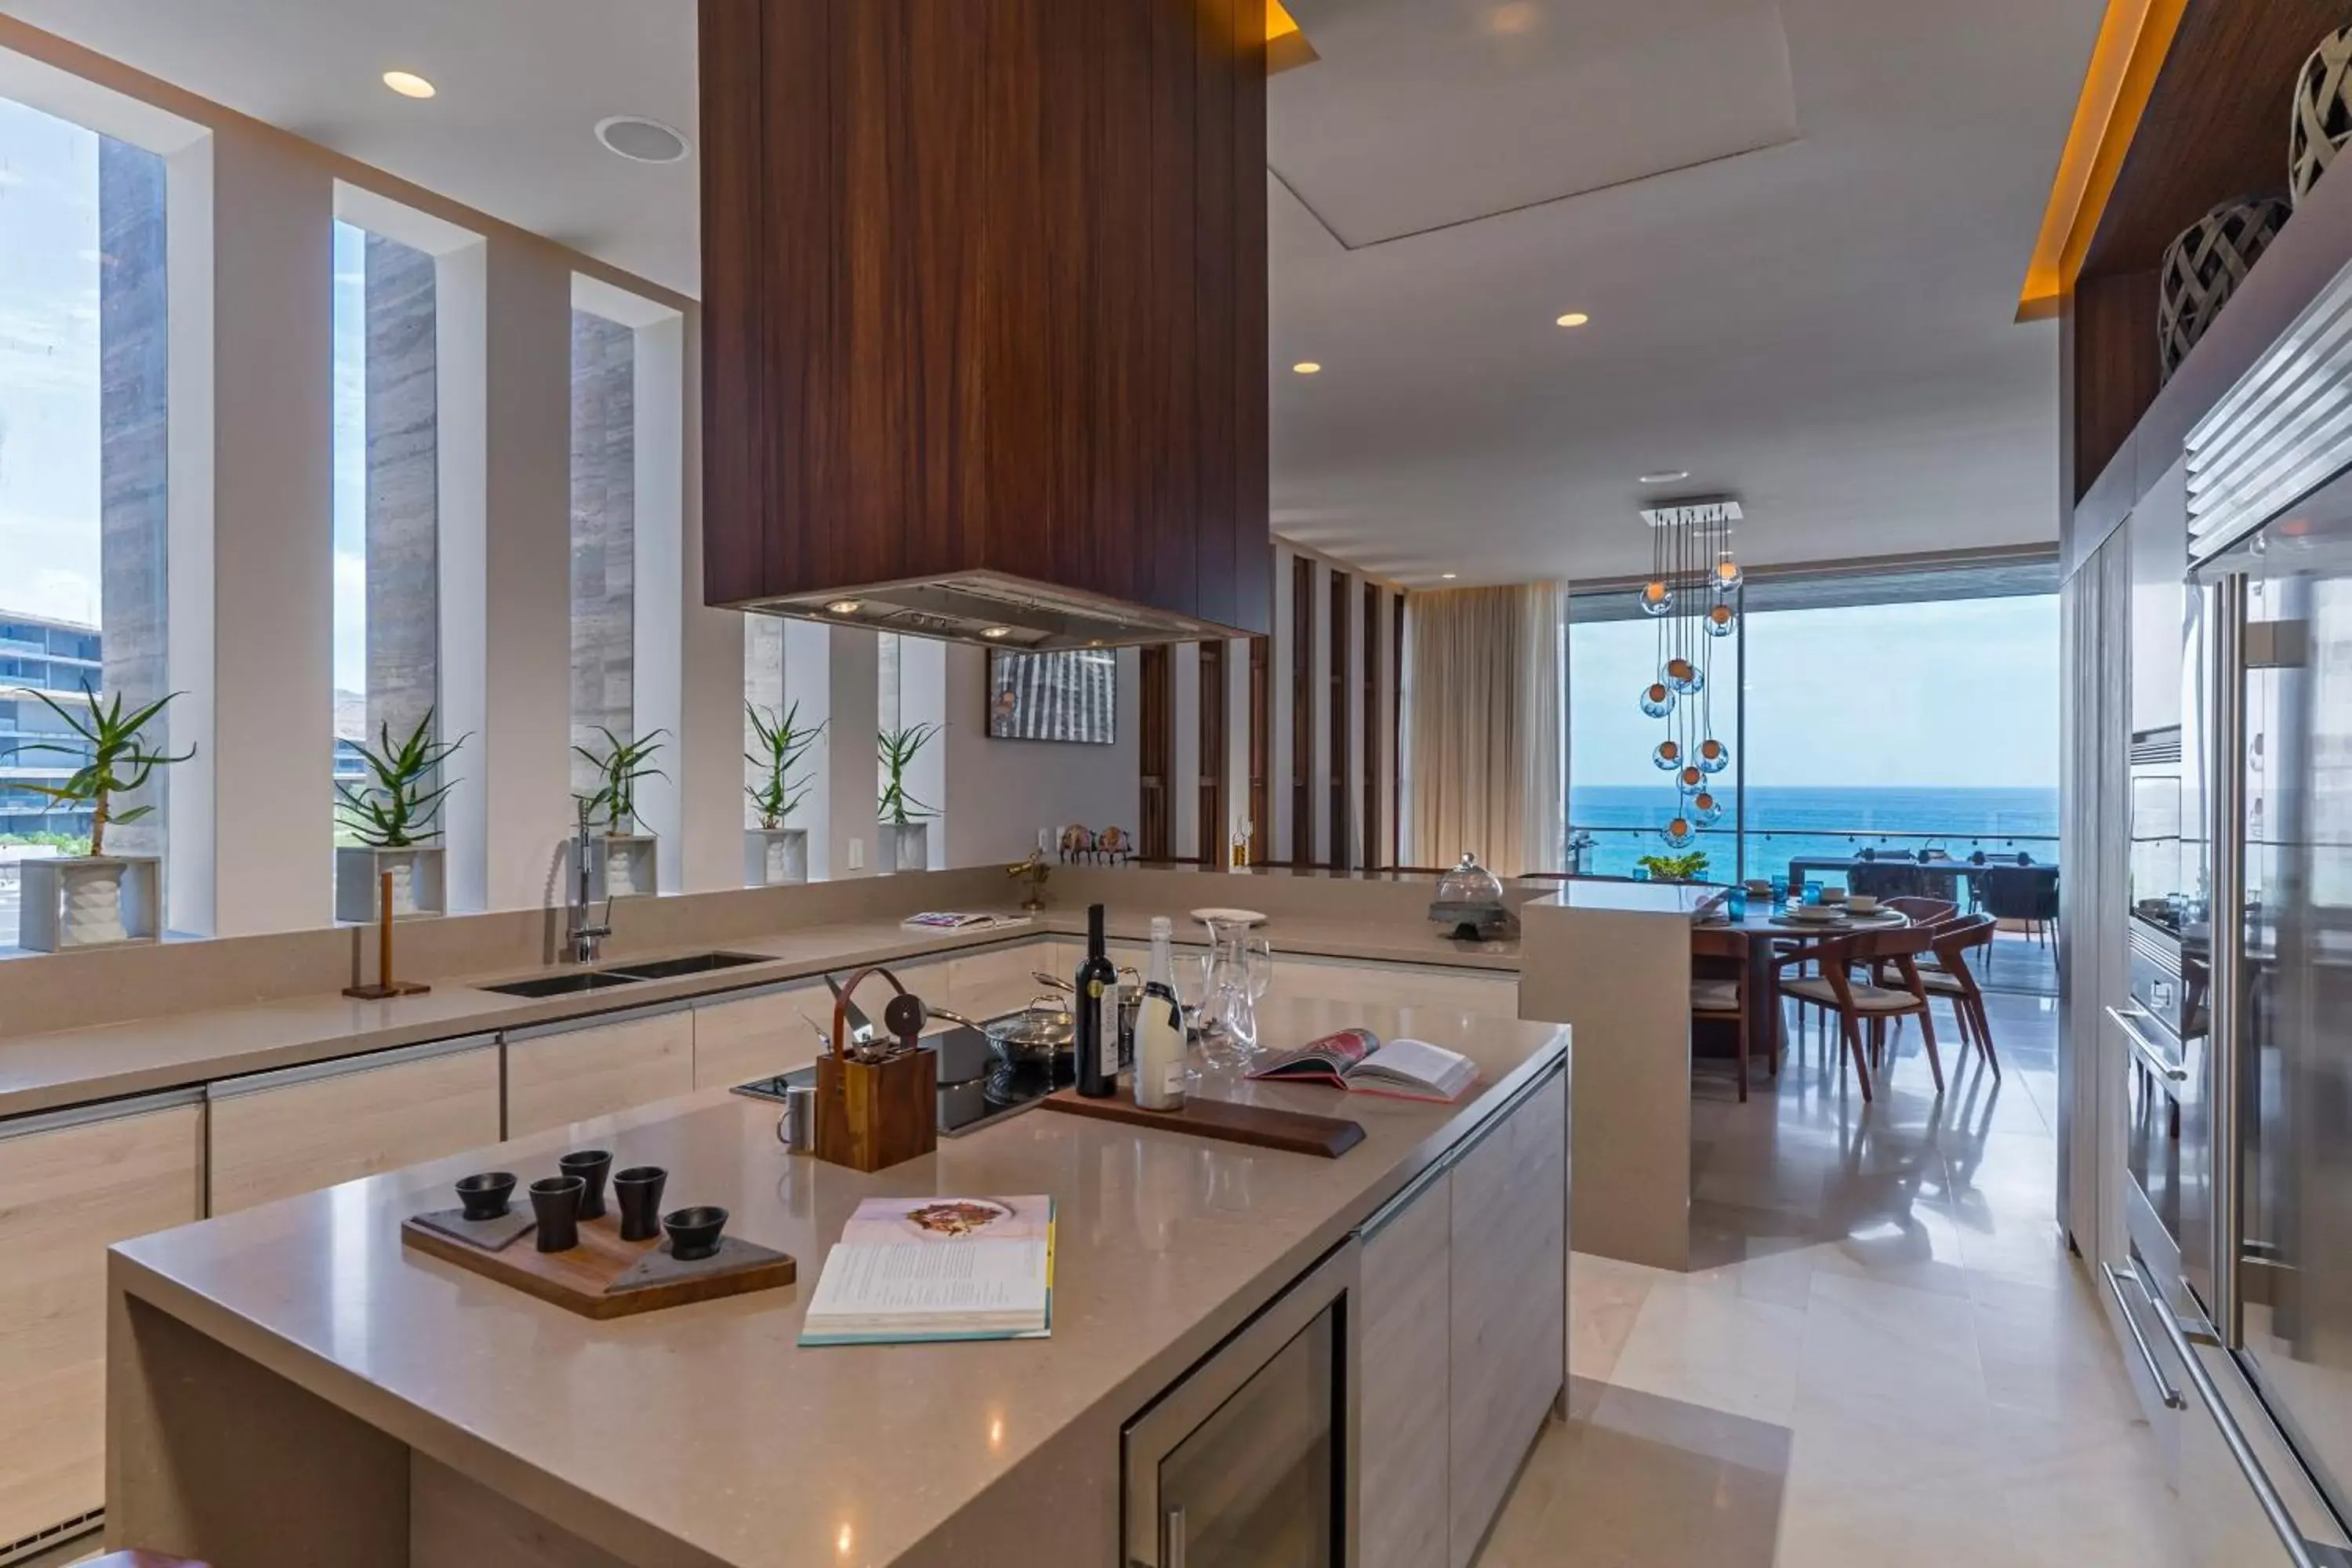 Kitchen or kitchenette in Solaz, a Luxury Collection Resort, Los Cabos